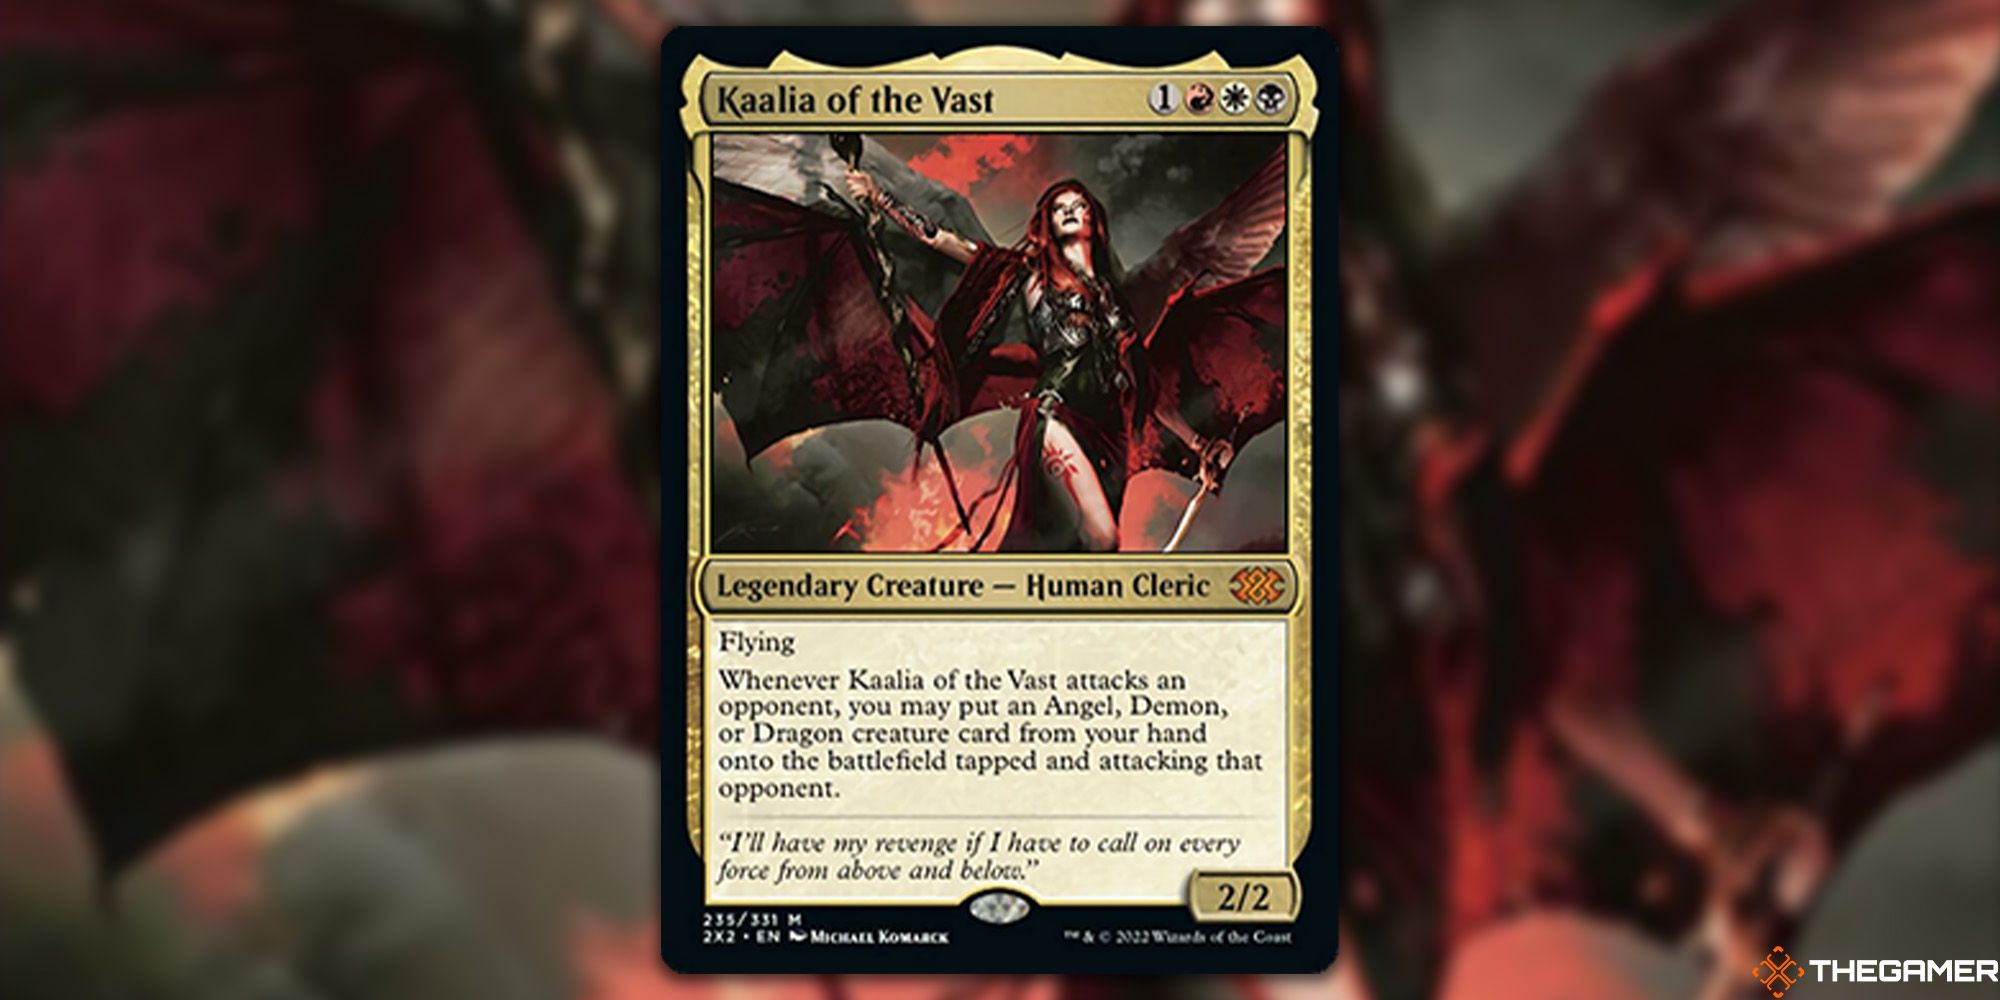 Image of Kaalia of the Vast card in Magic: The Gathering, with artwork by Michael Komarck